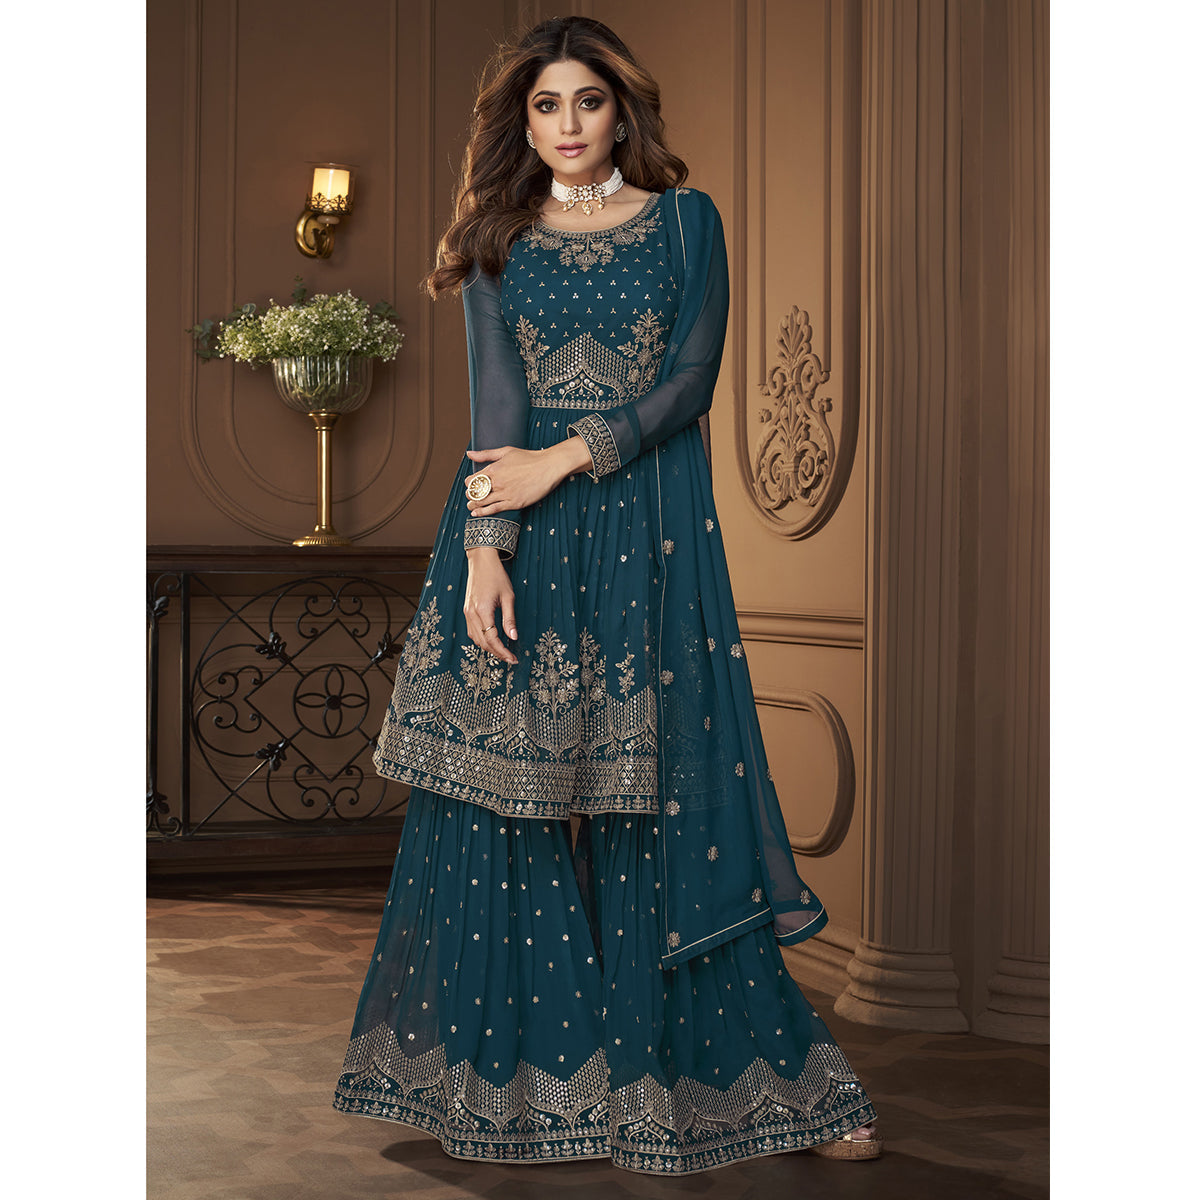 Shafnufab Heavy Faux Georgette Semi Stitched Plazzo Suit In Turquoise Colour